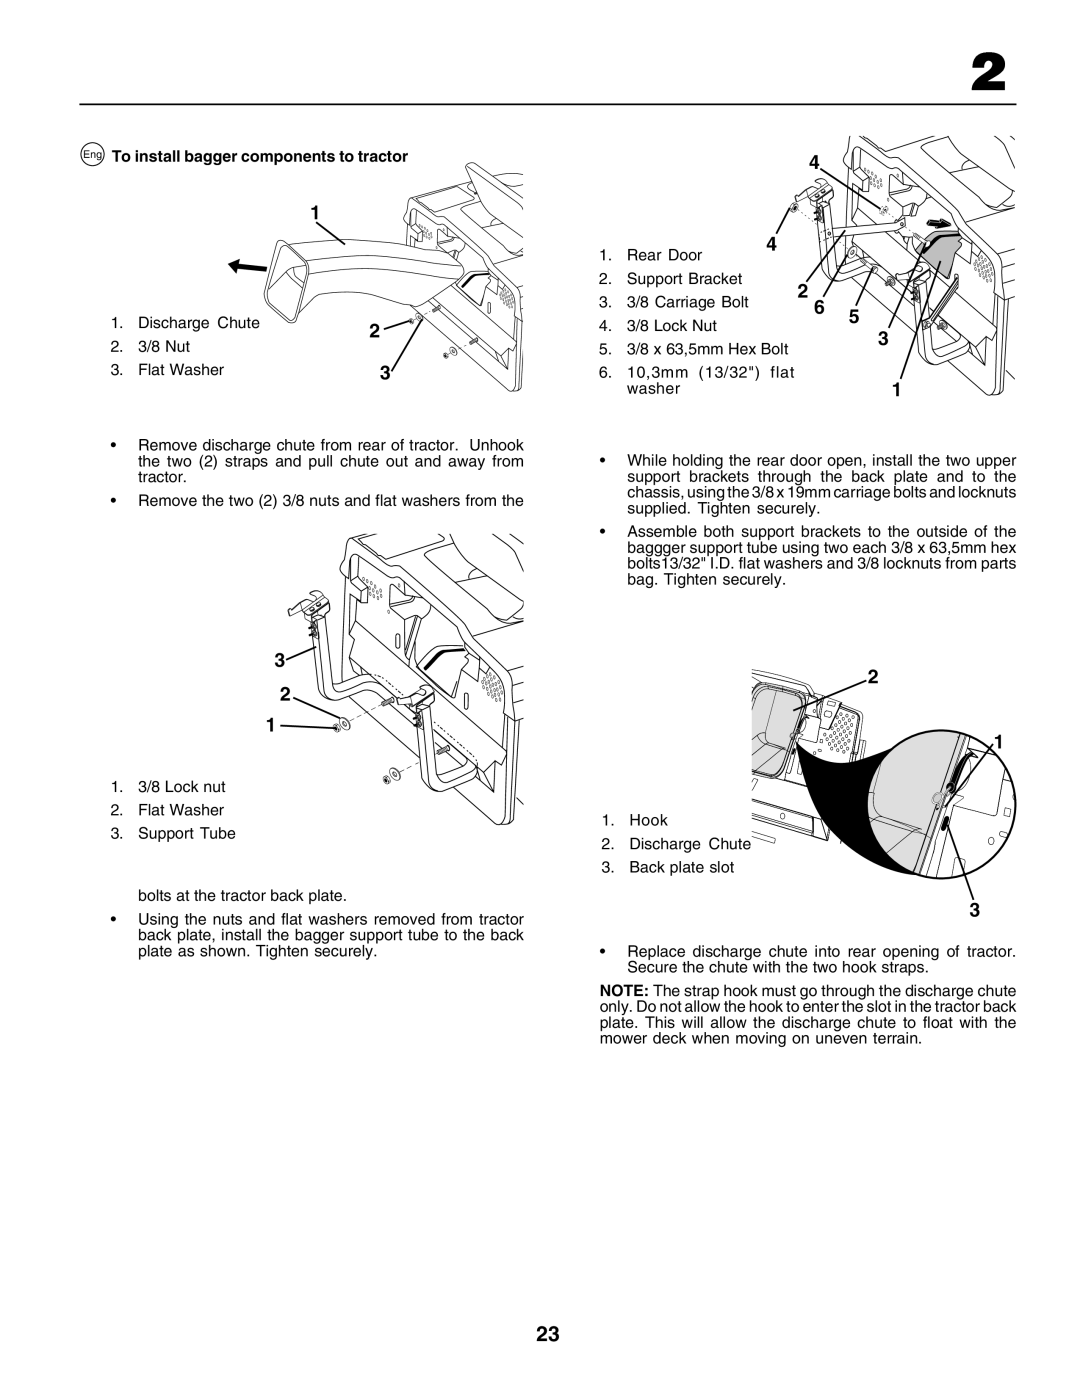 Husqvarna CT135 instruction manual 3 2 1, Eng To install bagger components to tractor 